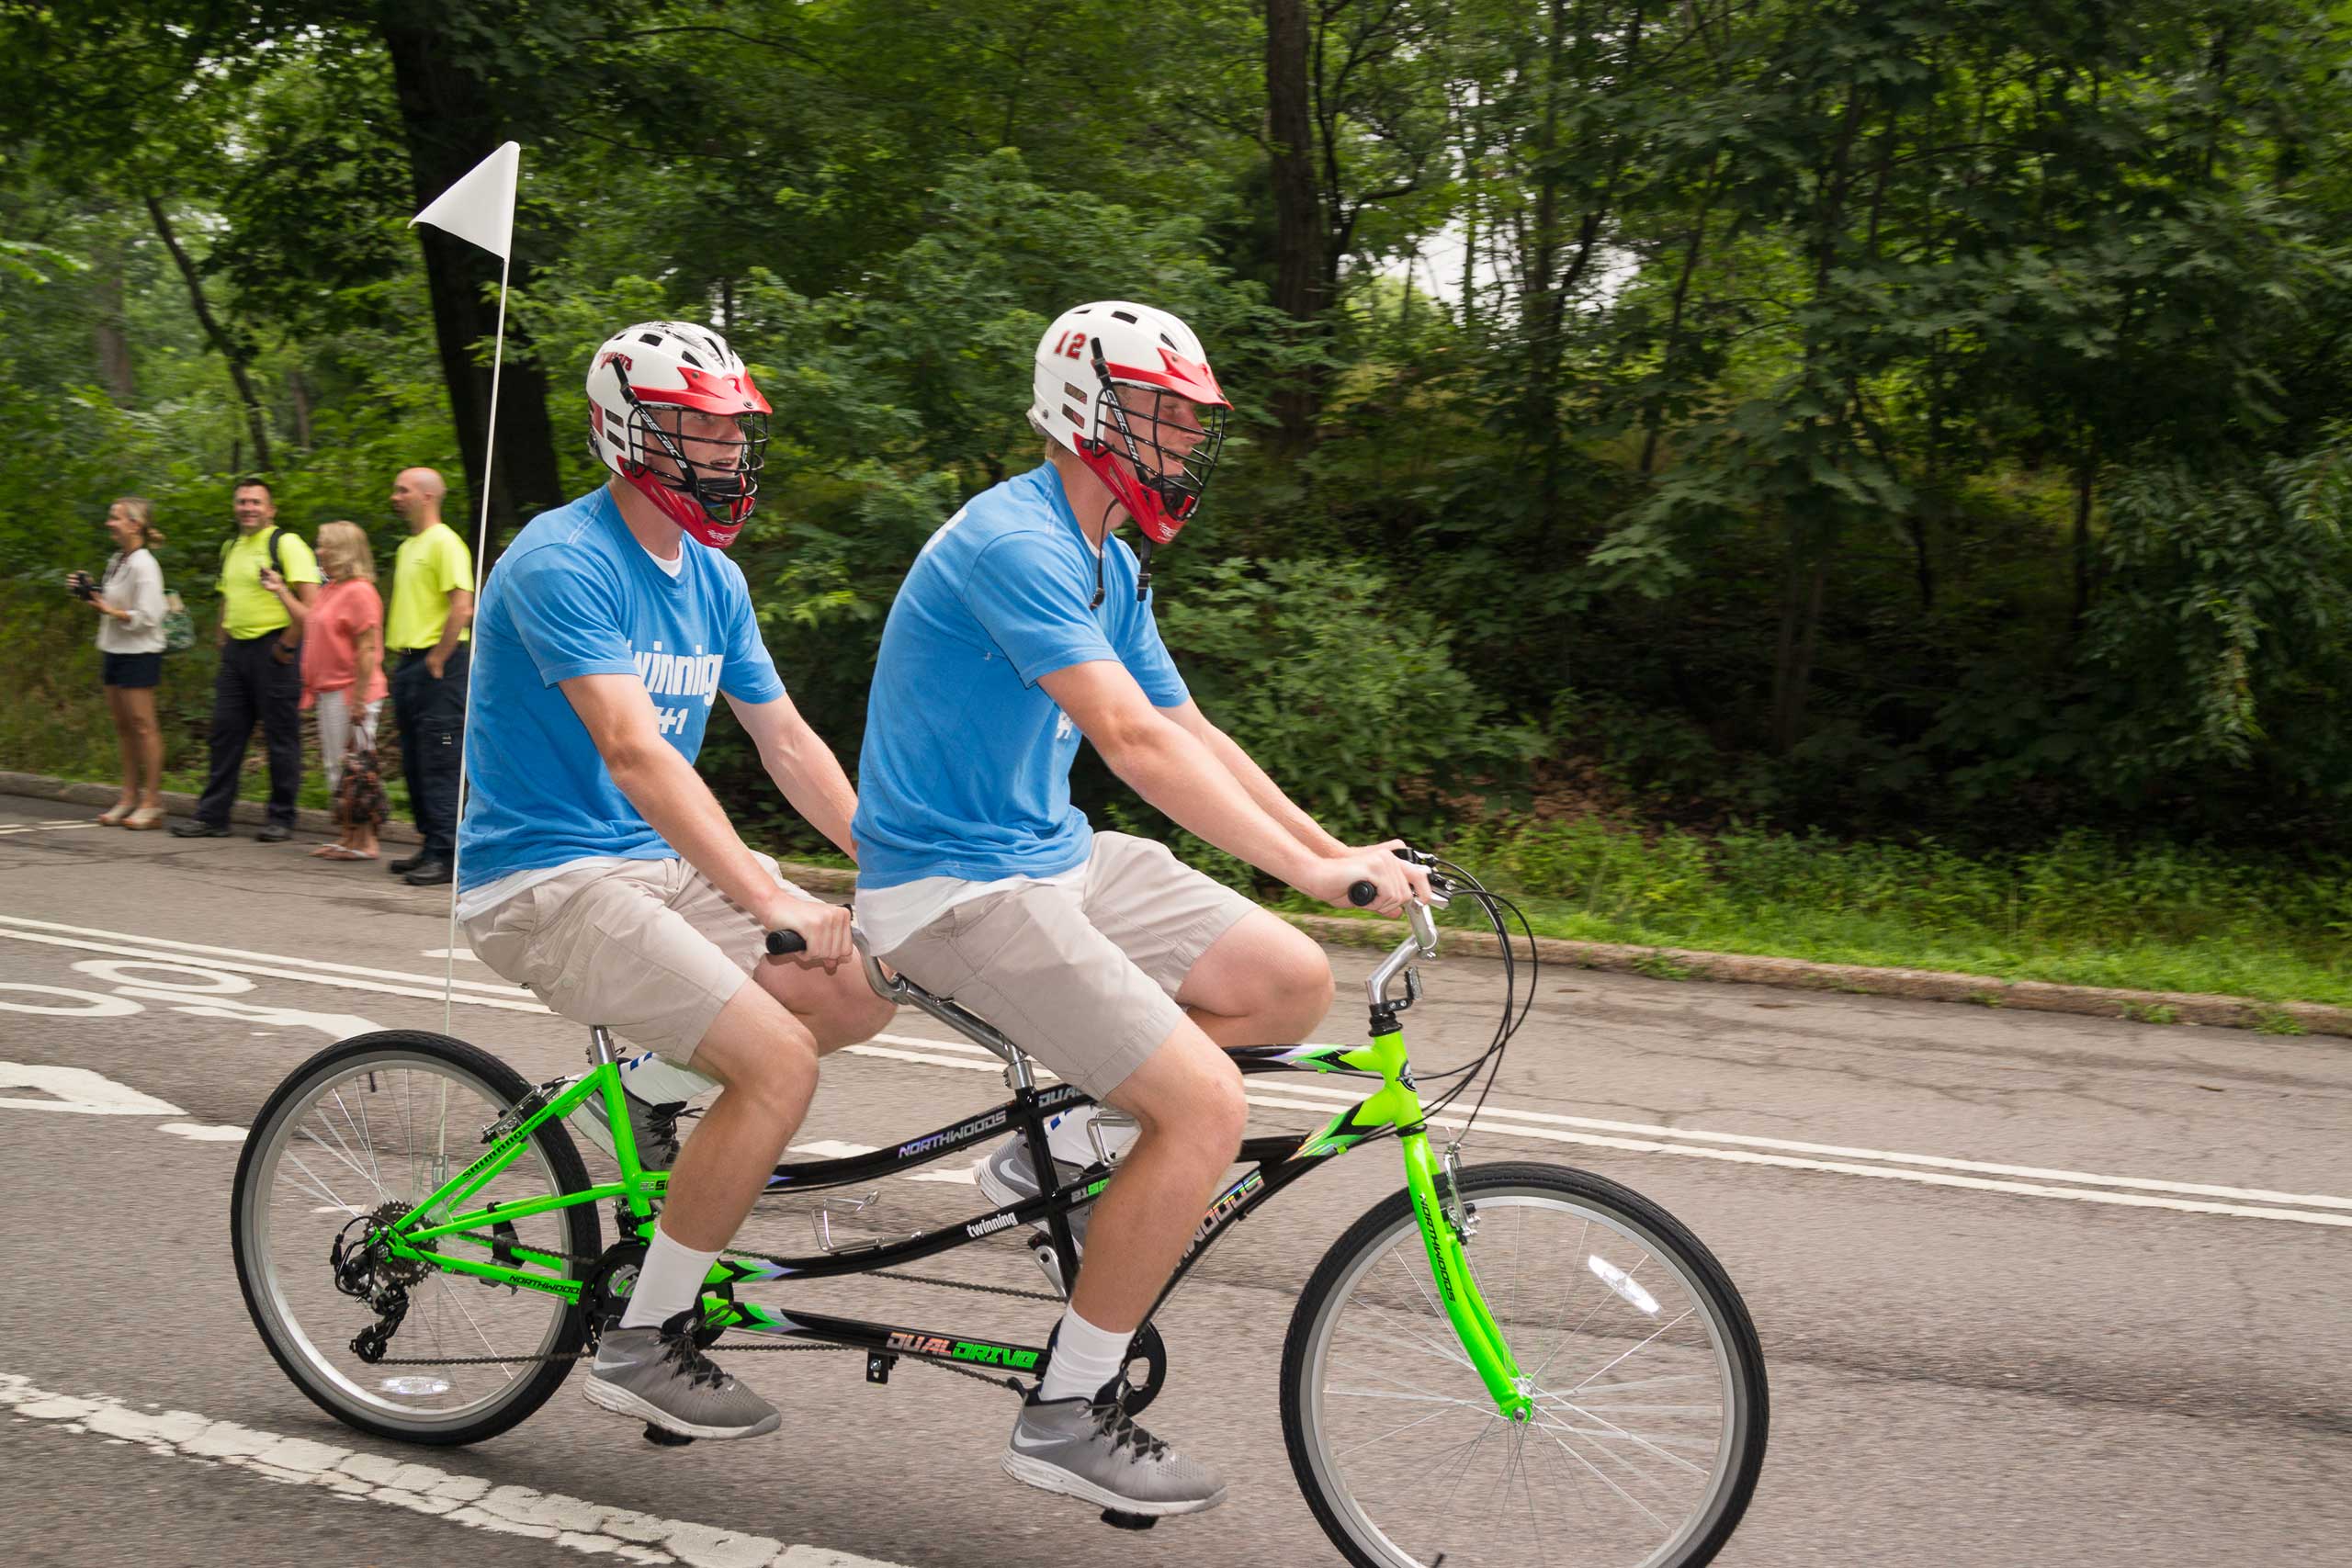 Hundreds of twins ride tandem bikes in an attempt to set the record for the most twins ever riding tandem bikes, in Central Park in New York City on July 15, 2015.